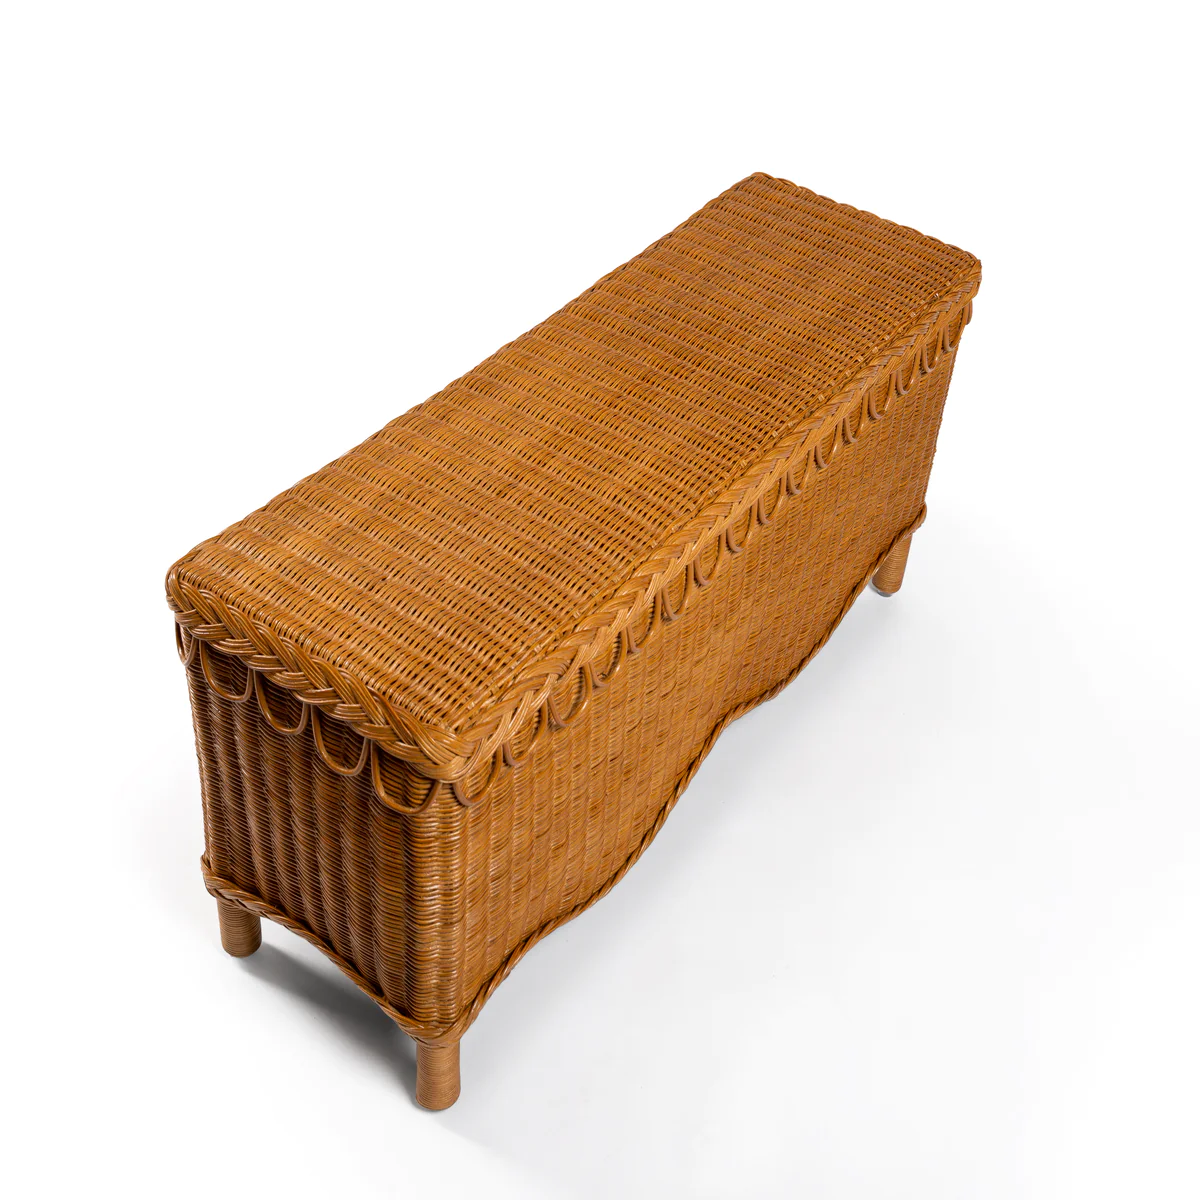 a wicker bench on a white background